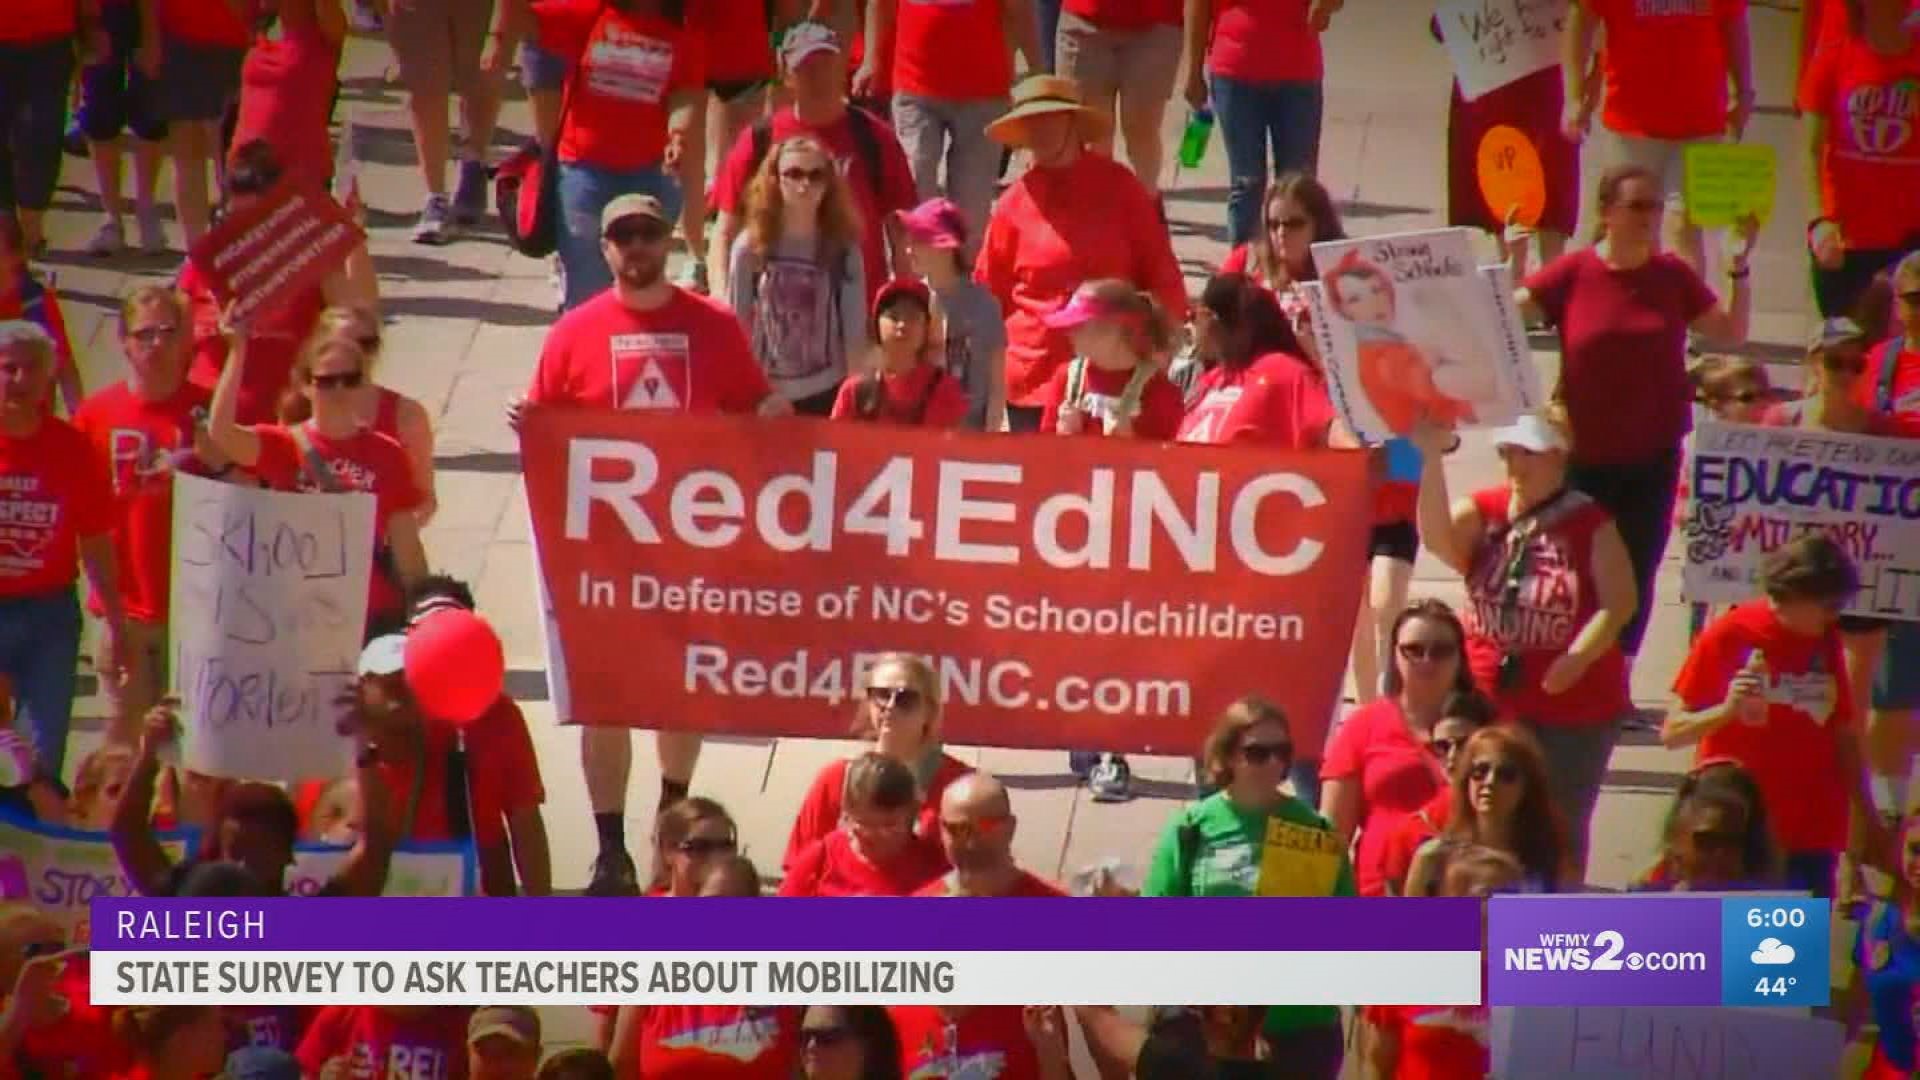 North Carolina Association of Educators President Mark Jewell says it's time more action. 
It's just a matter of figuring out how members want to protest.